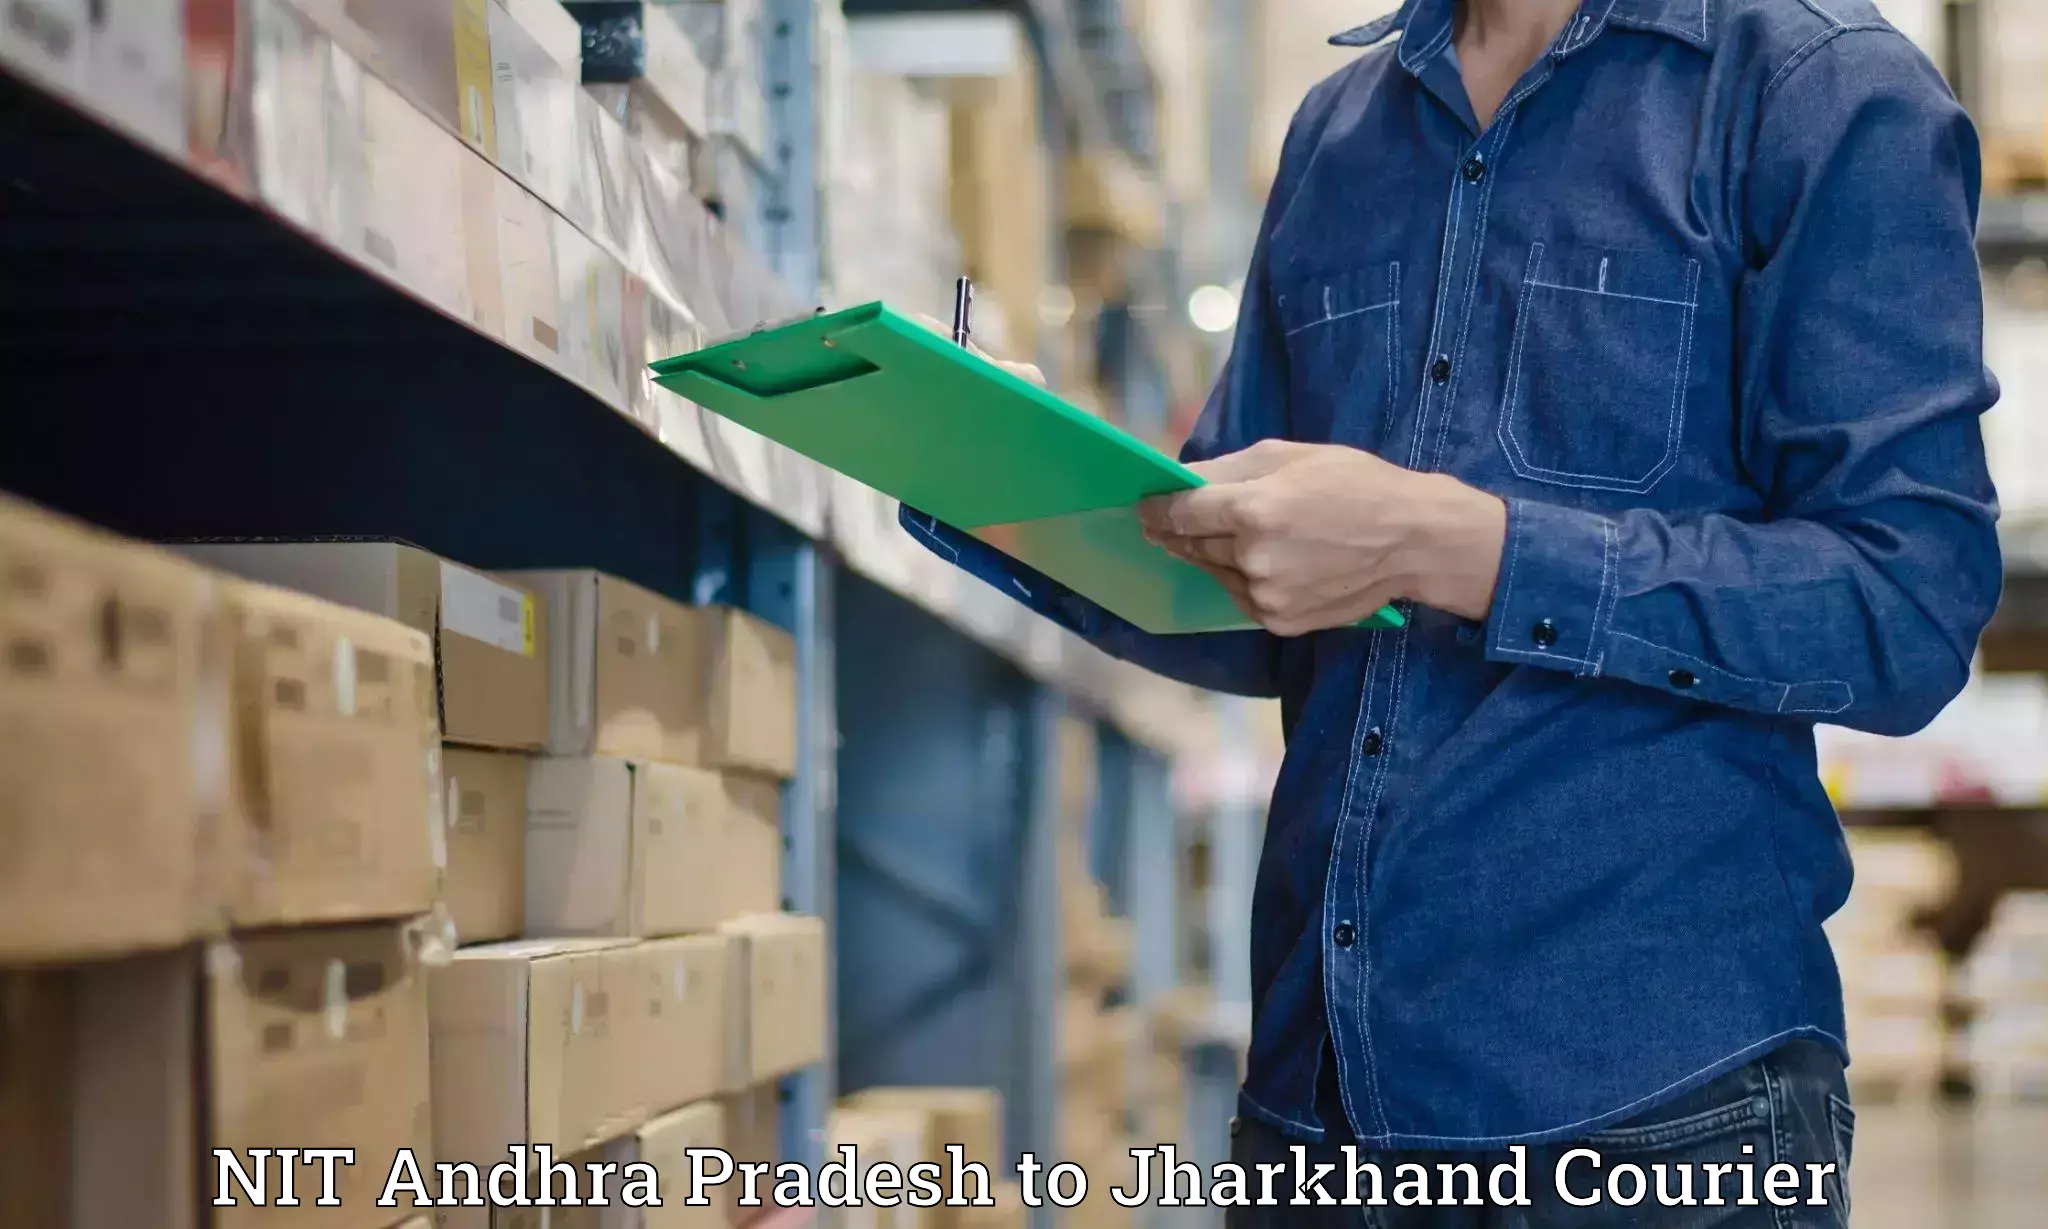 Express package services NIT Andhra Pradesh to Jharkhand